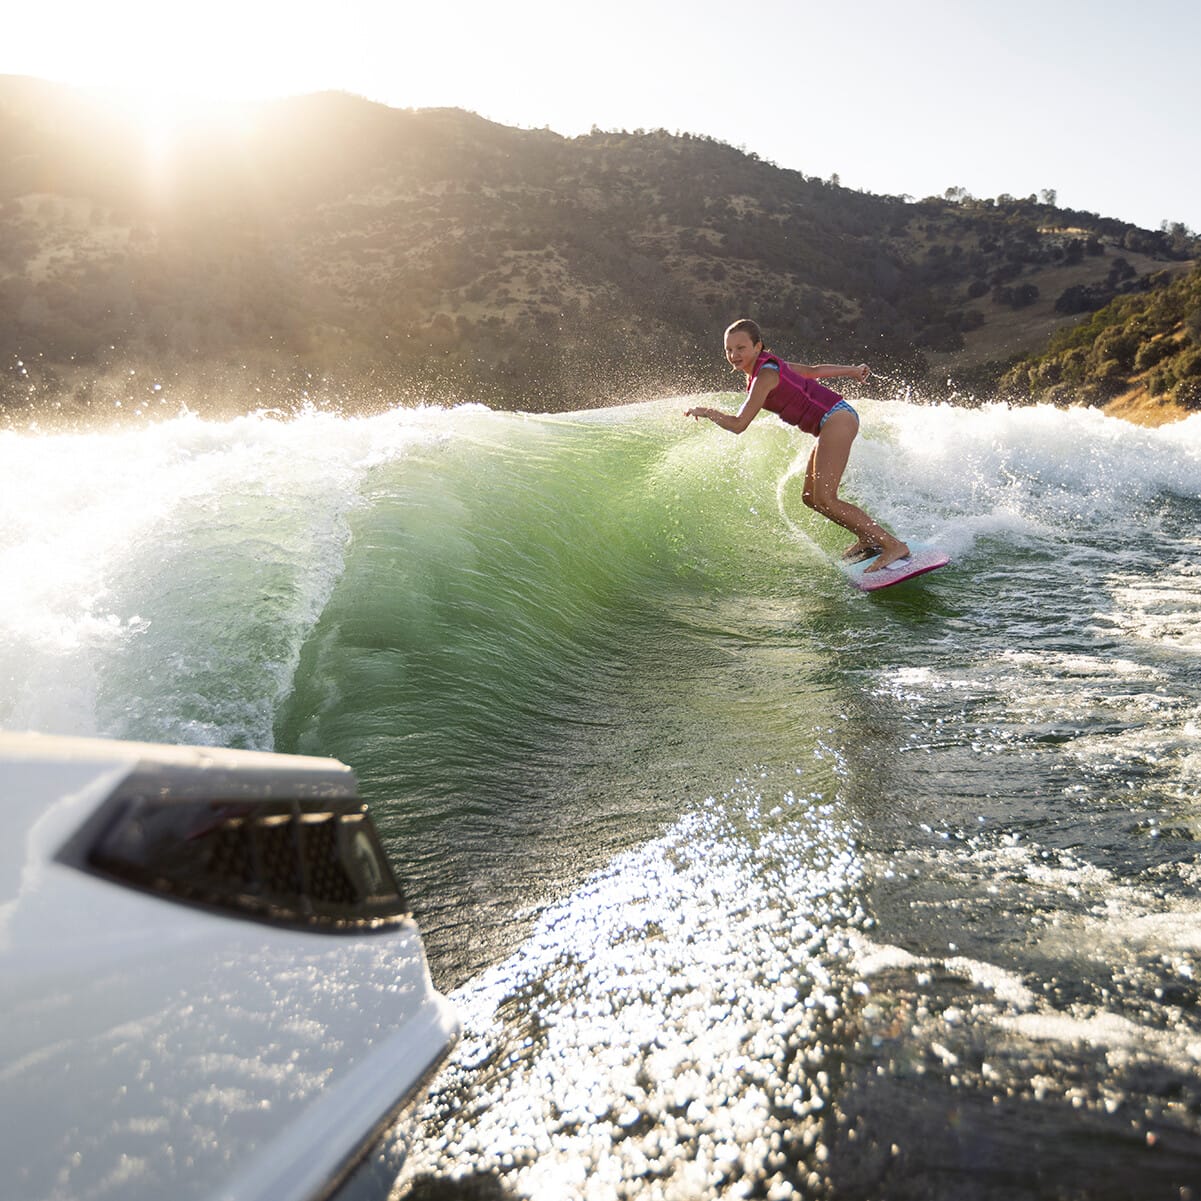 A person surfs on a green wave near a boat in a sunny, mountainous area.